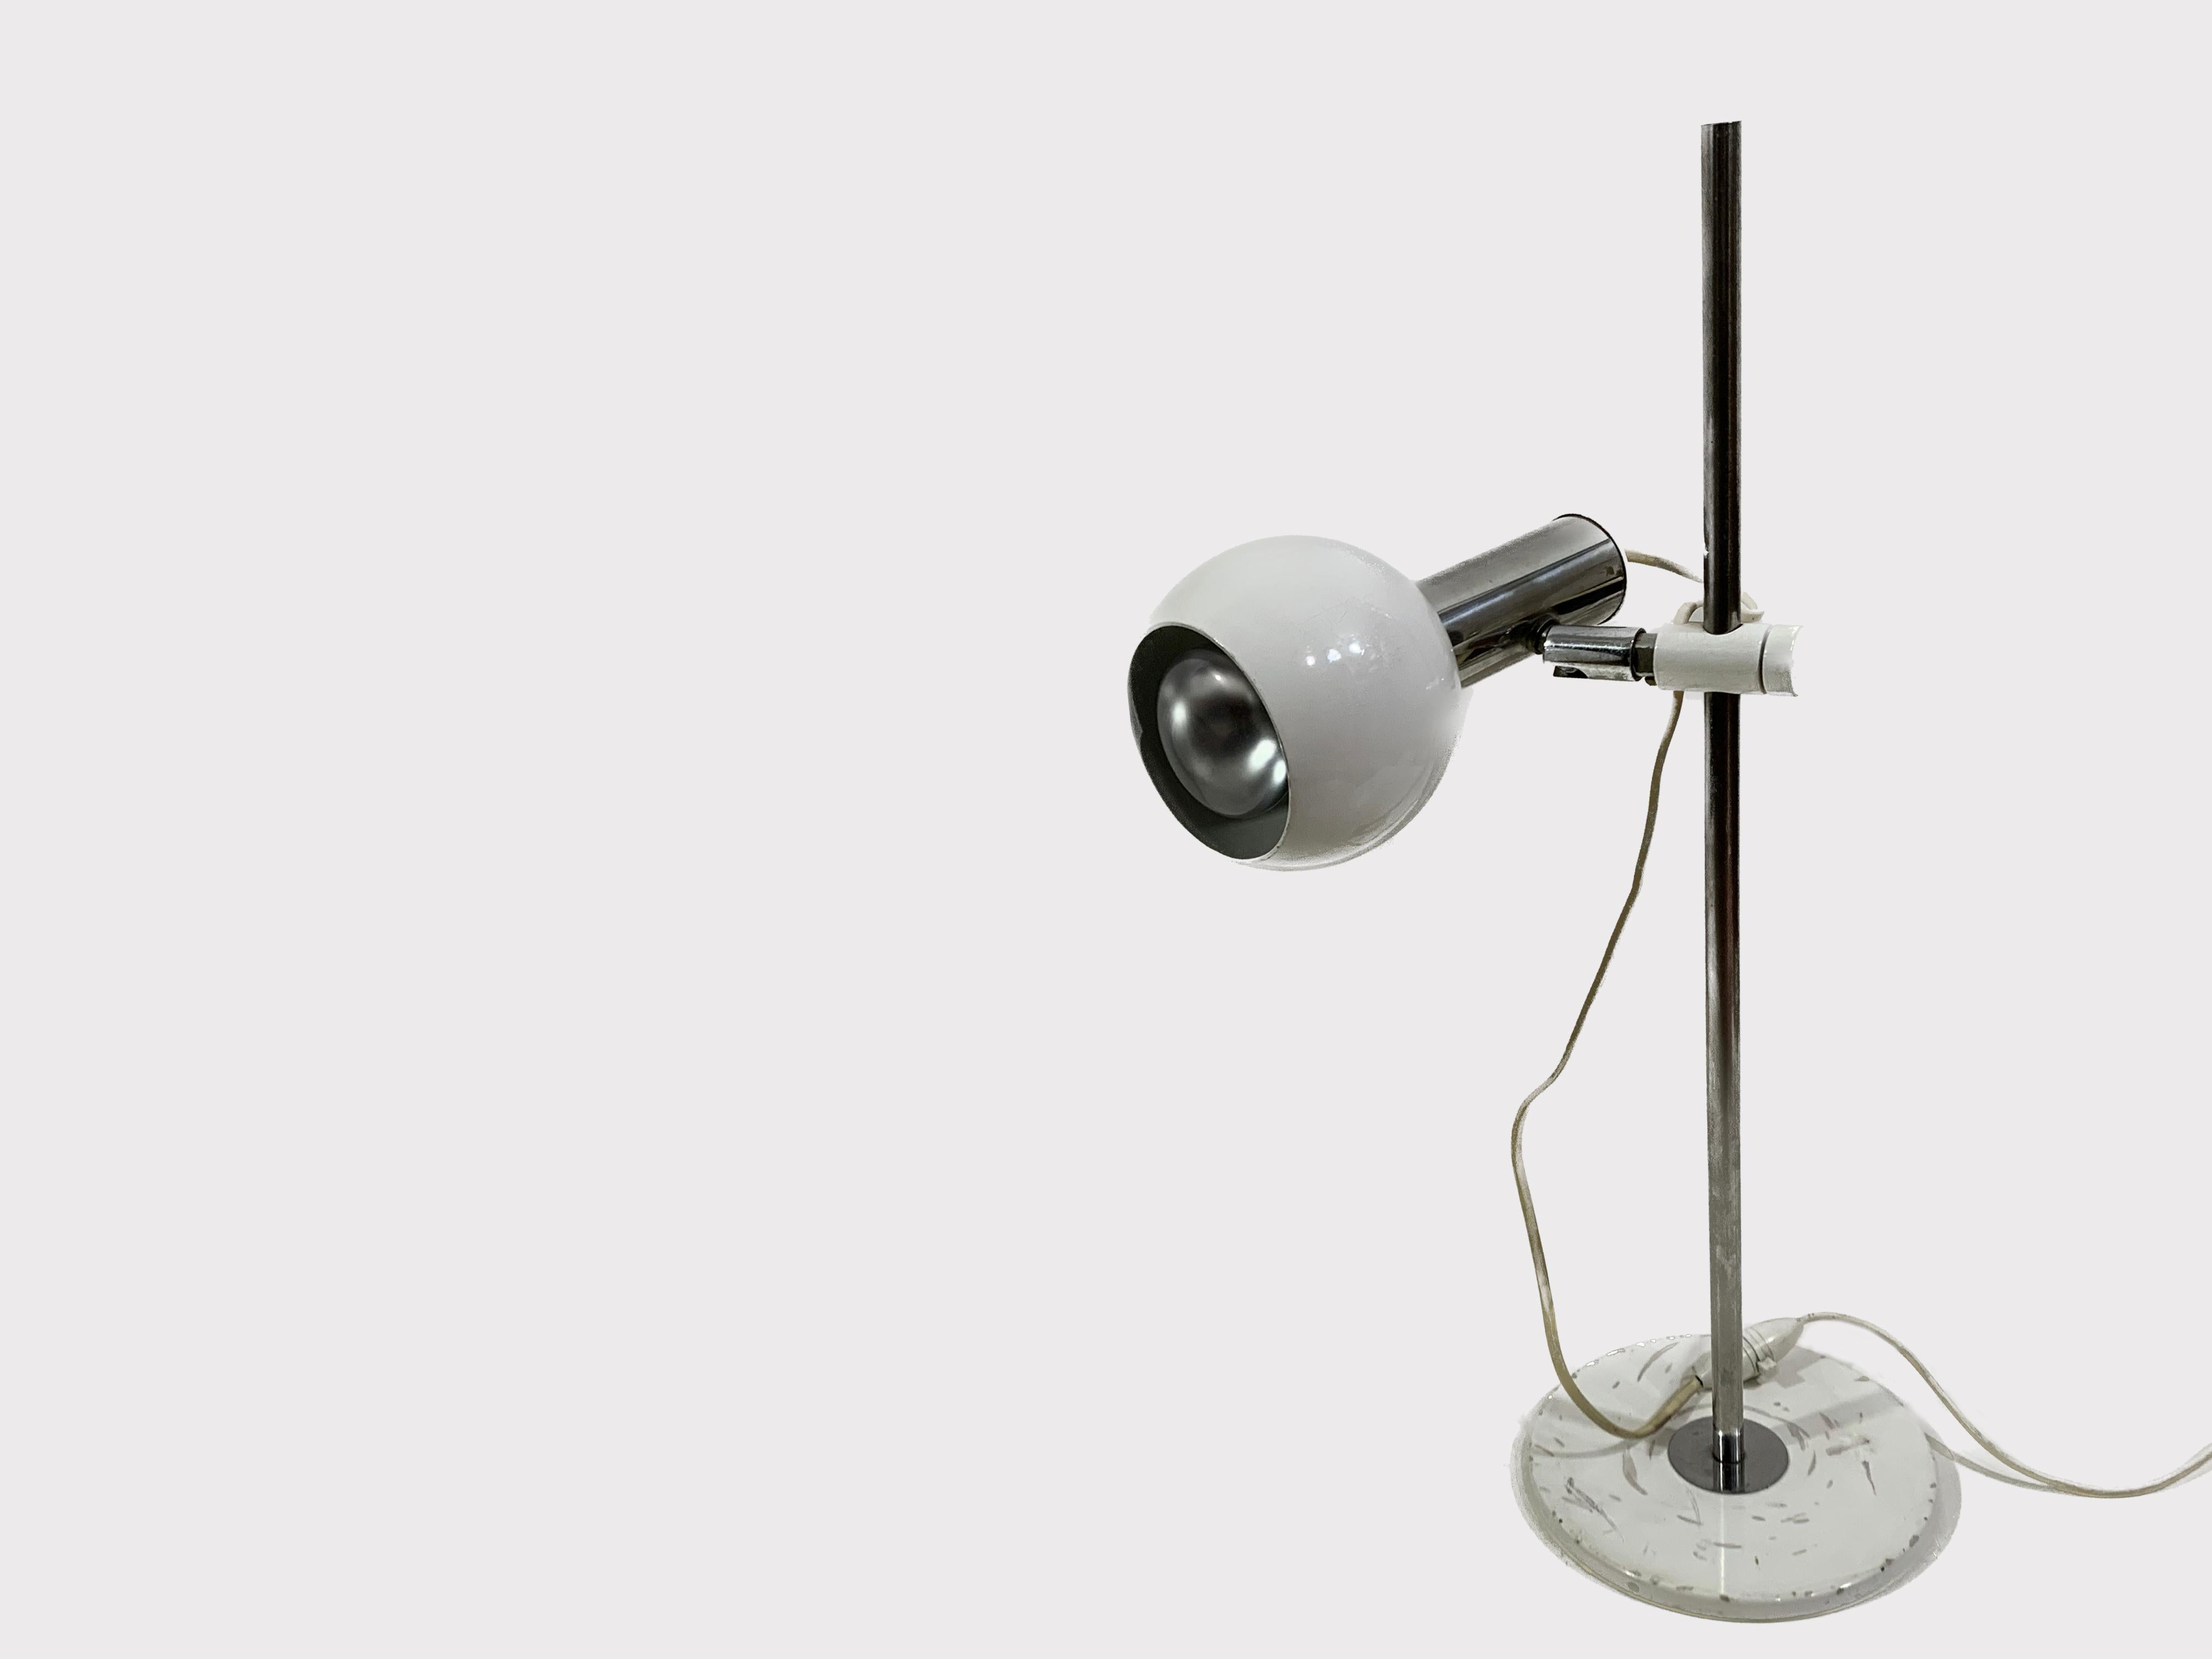 Minimalist design from the 1950's that was considered far ahead of its time. Made from metal, mounted on a high rod which allows the user to adjust the height of the light.
Head is also steerable and can be adjusted in several different directions